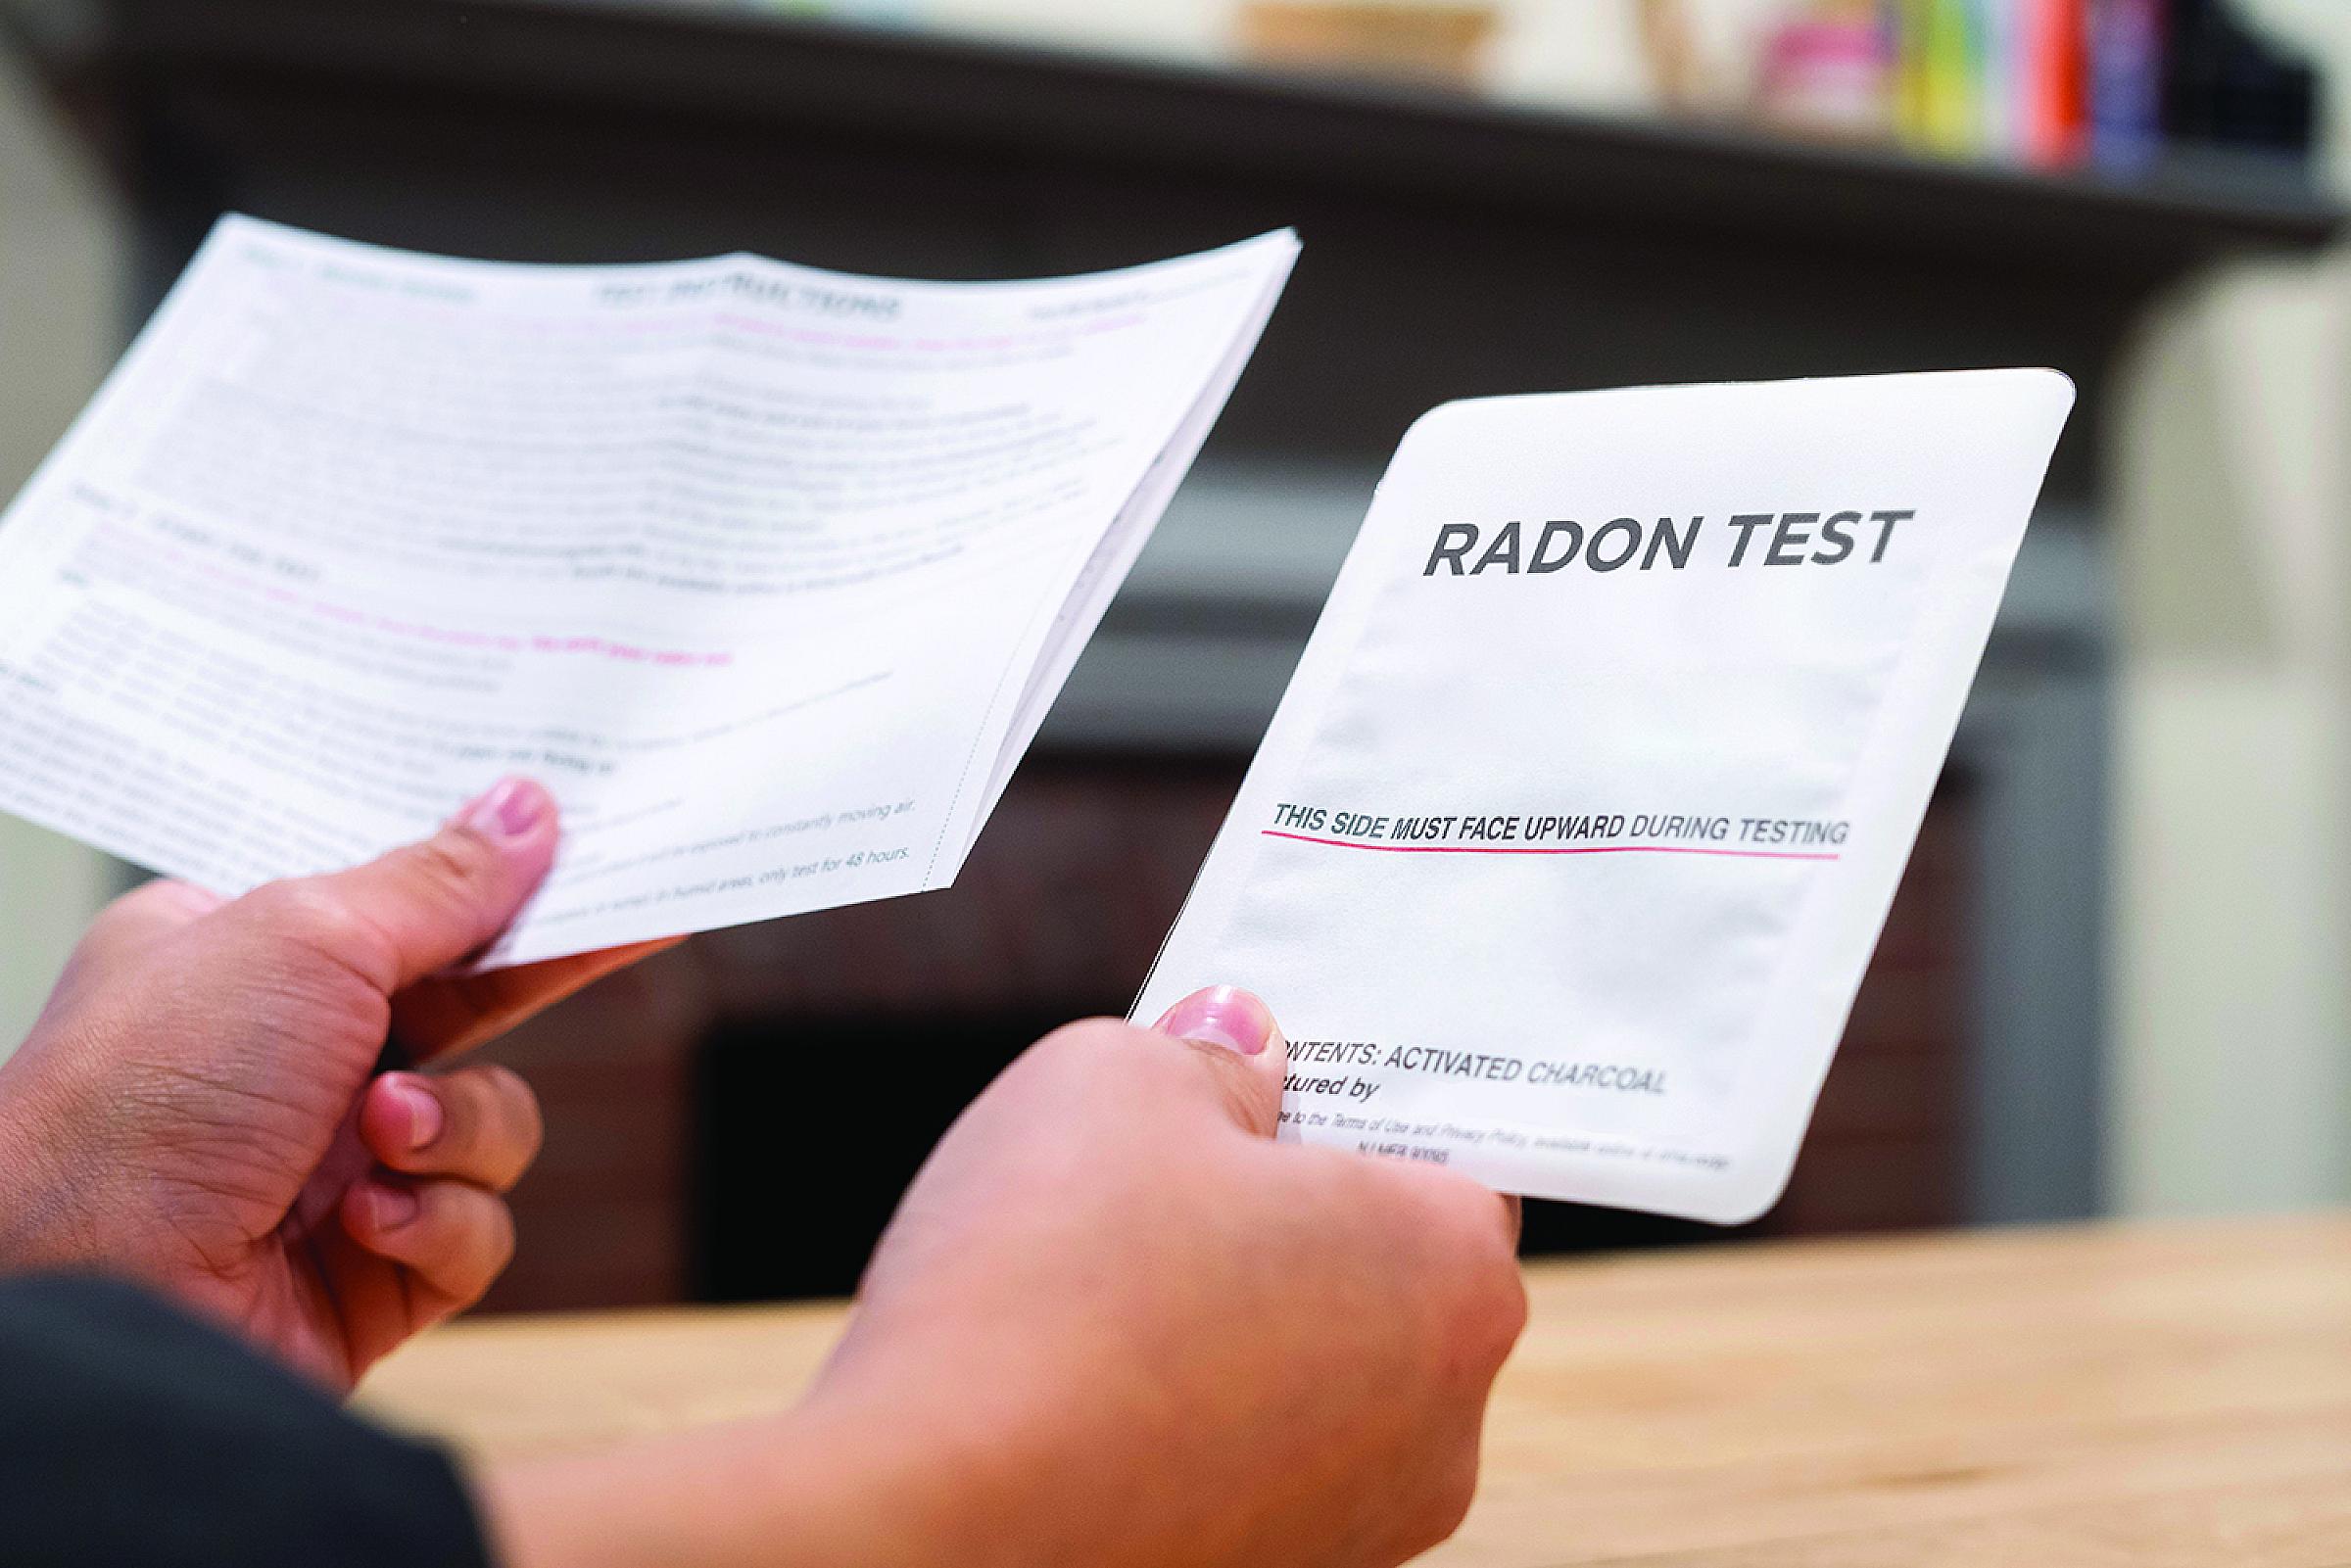 Person holding up instructions for radon test